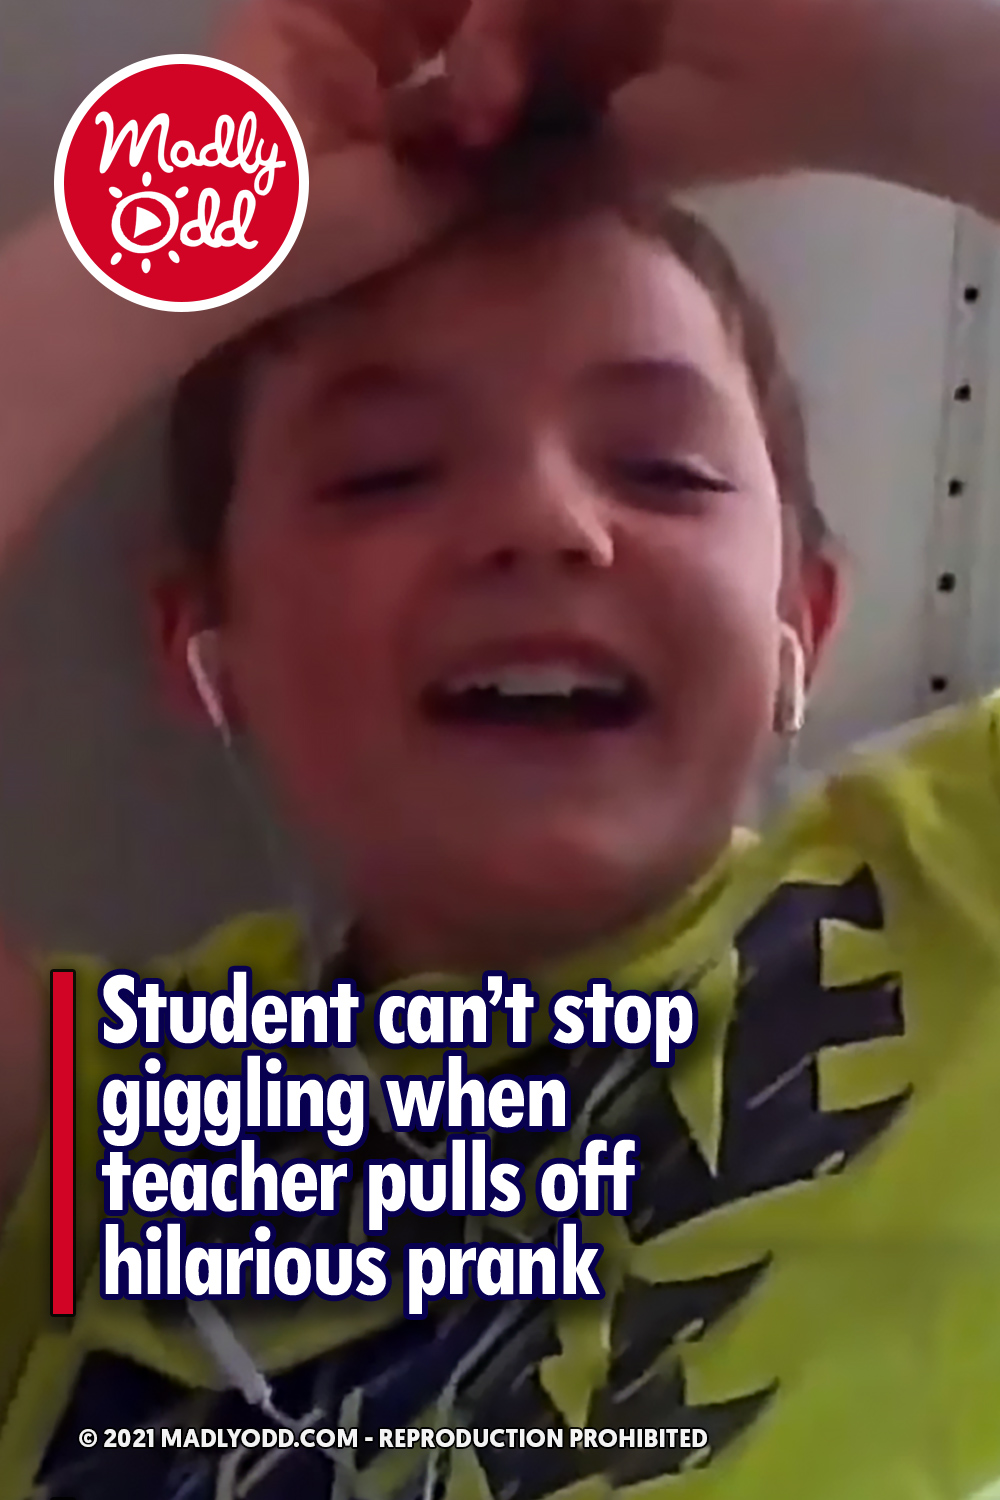 Student can’t stop giggling when teacher pulls off hilarious prank